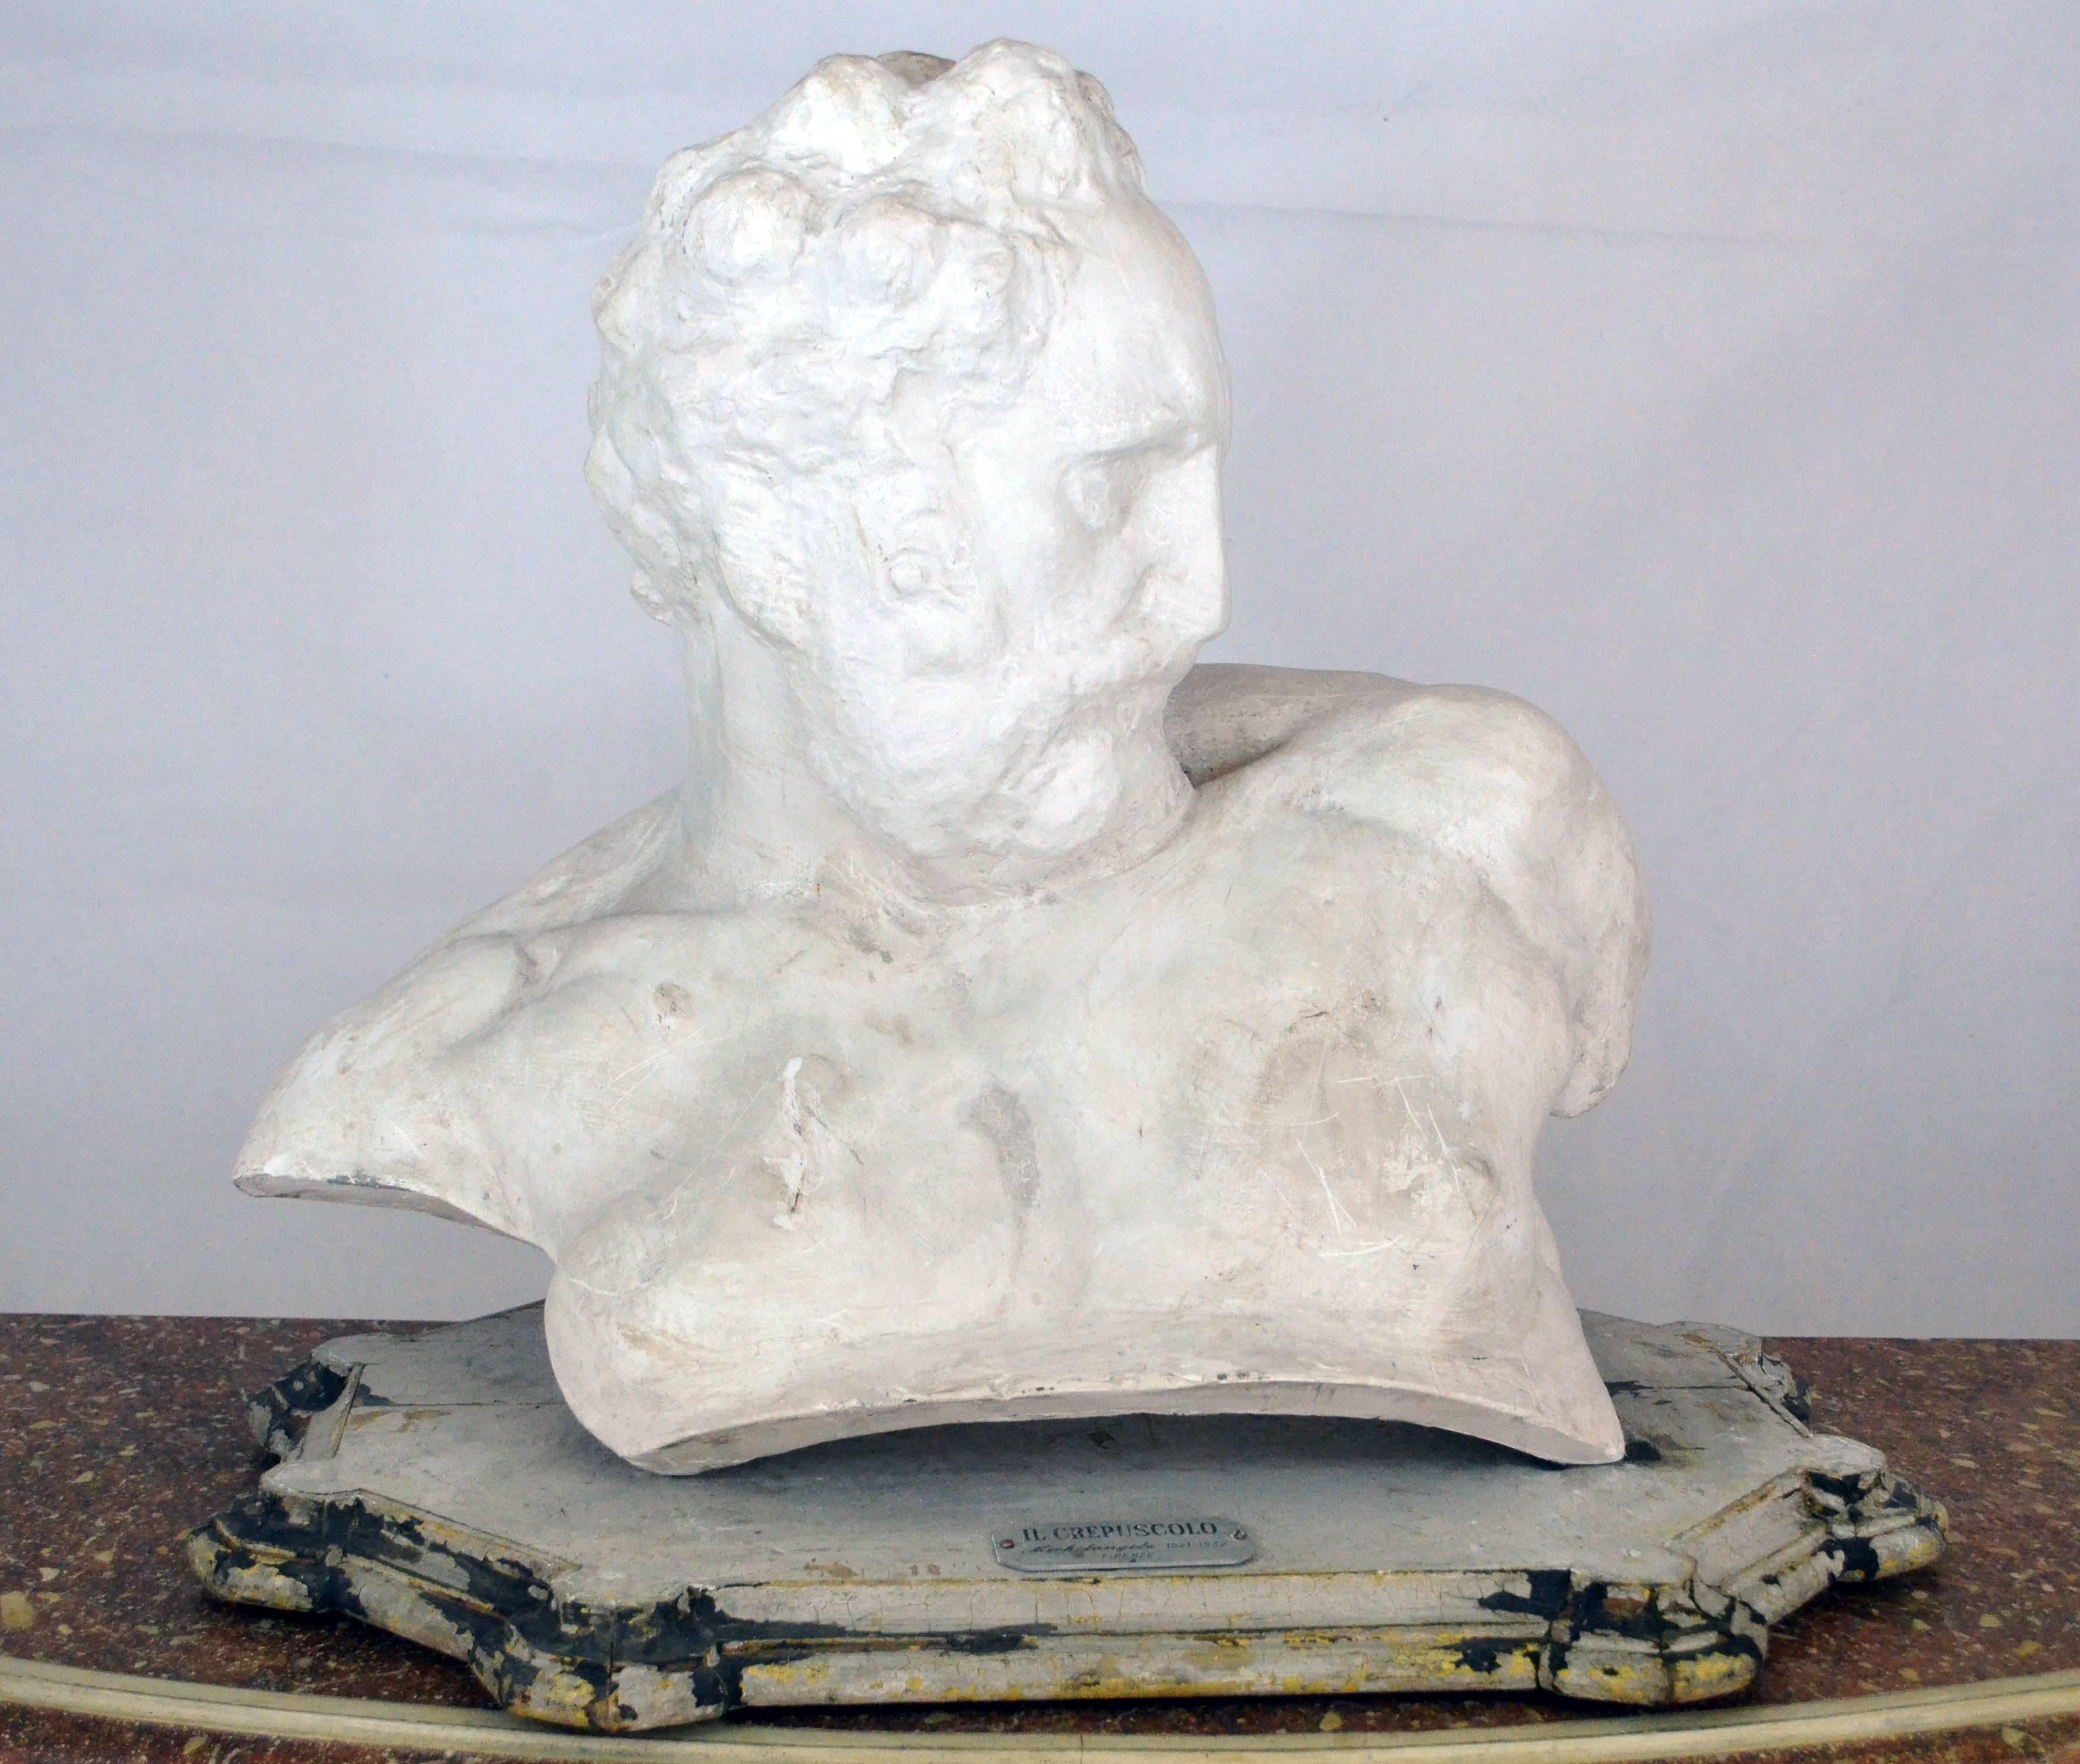 Italian white big plaster bust academic representation of Crepuscolo, 1950s

Originally the sunset by Michelangelo Buonarroti was made in marble circa 1524 to decorate San Lorenzo sacristy in Florence, as it is stated in the label on the